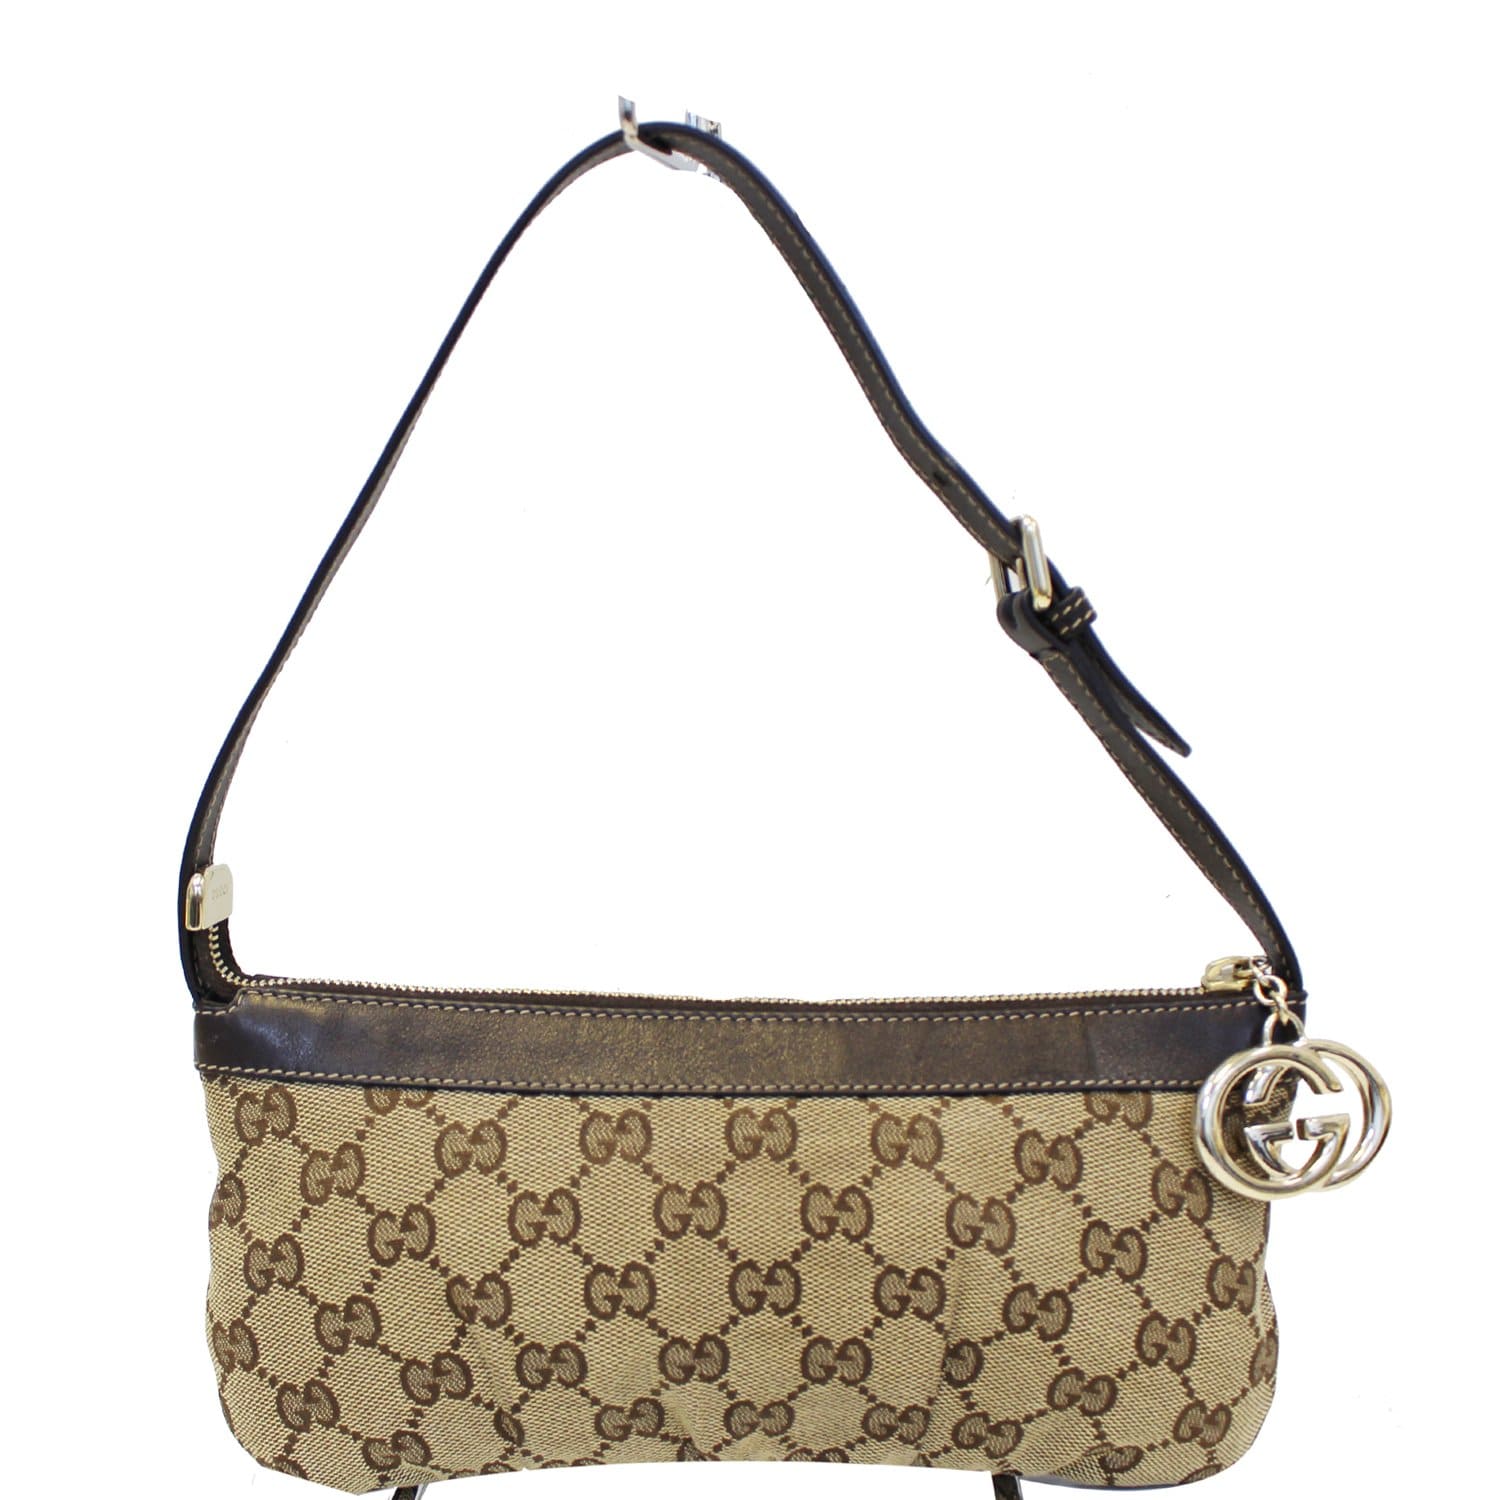 Gucci, Bags, Authentic New Gucci Interlocking G Chain Beige Leather  Shoulder Bag